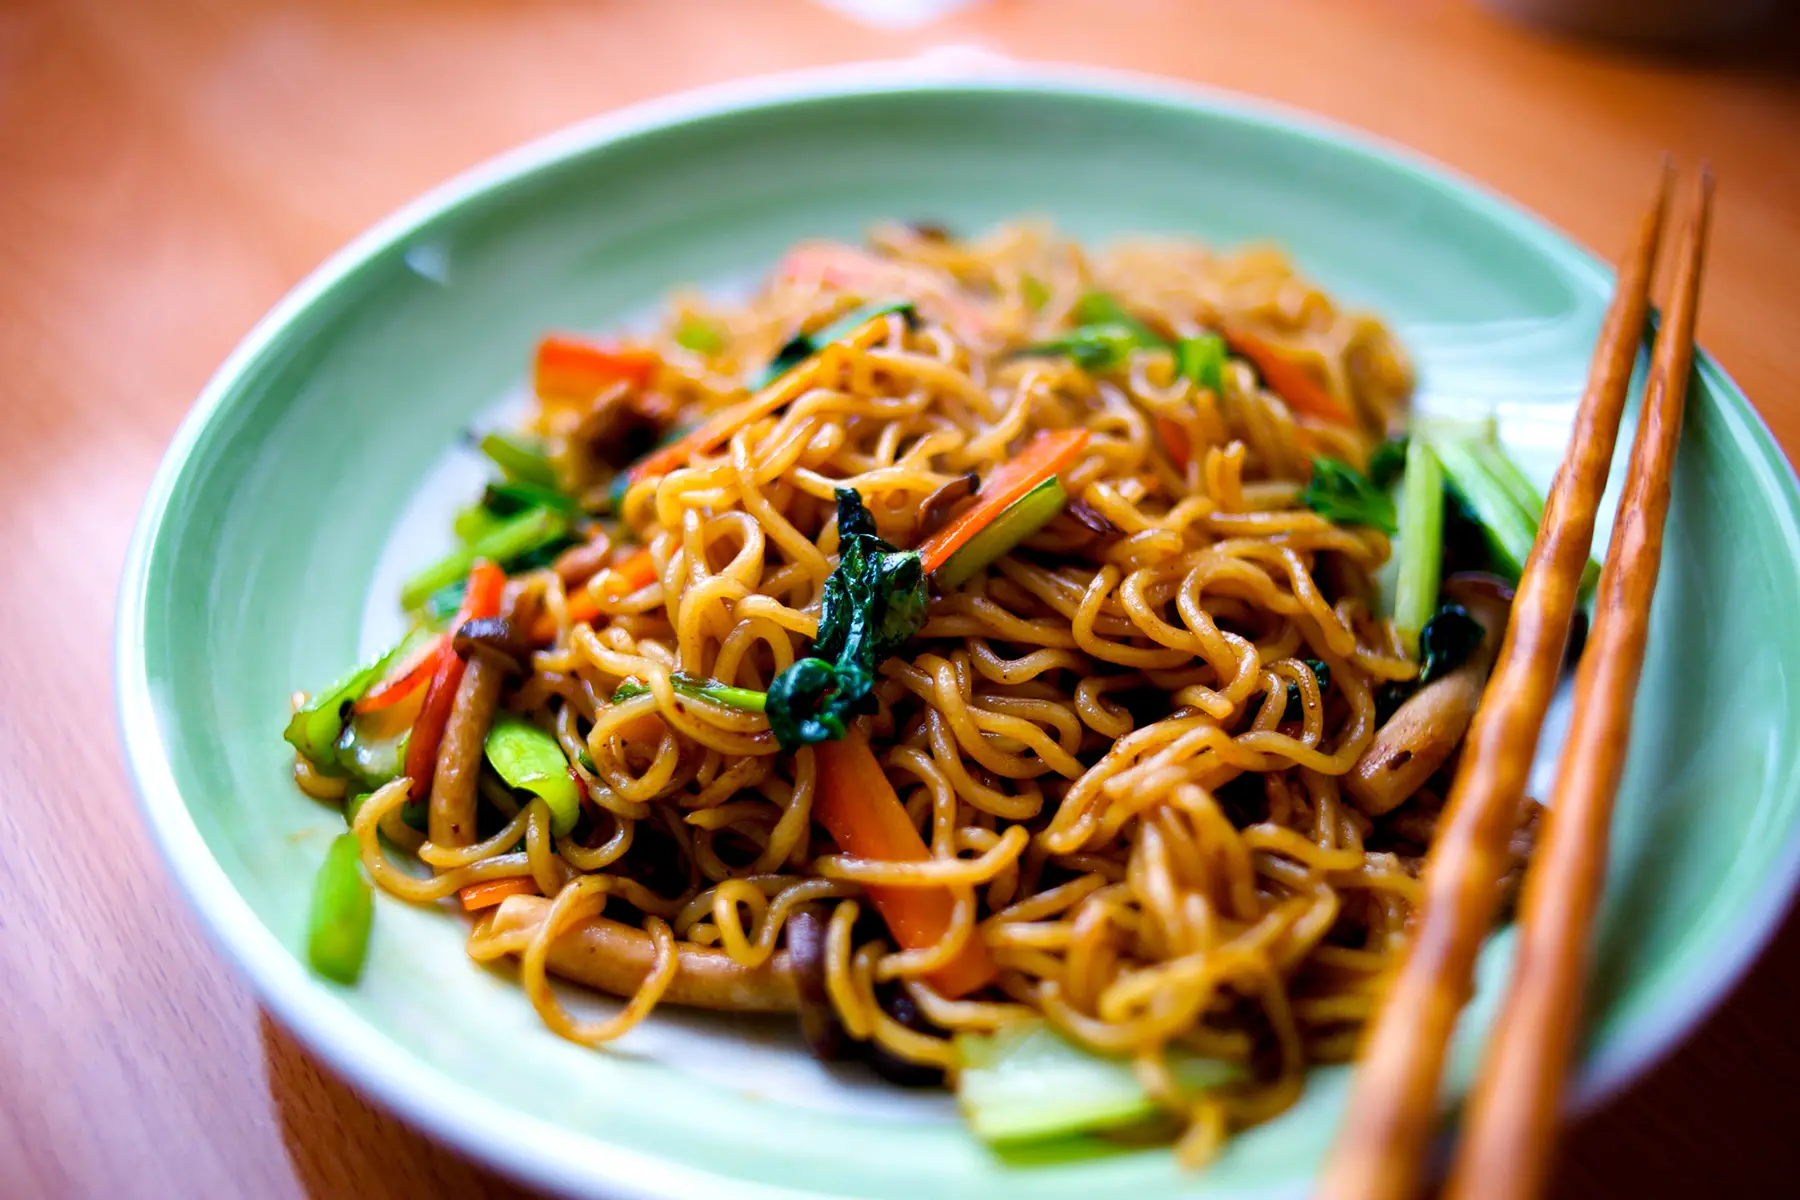 Yakisoba: noodles with sauce, meat, and vegetables